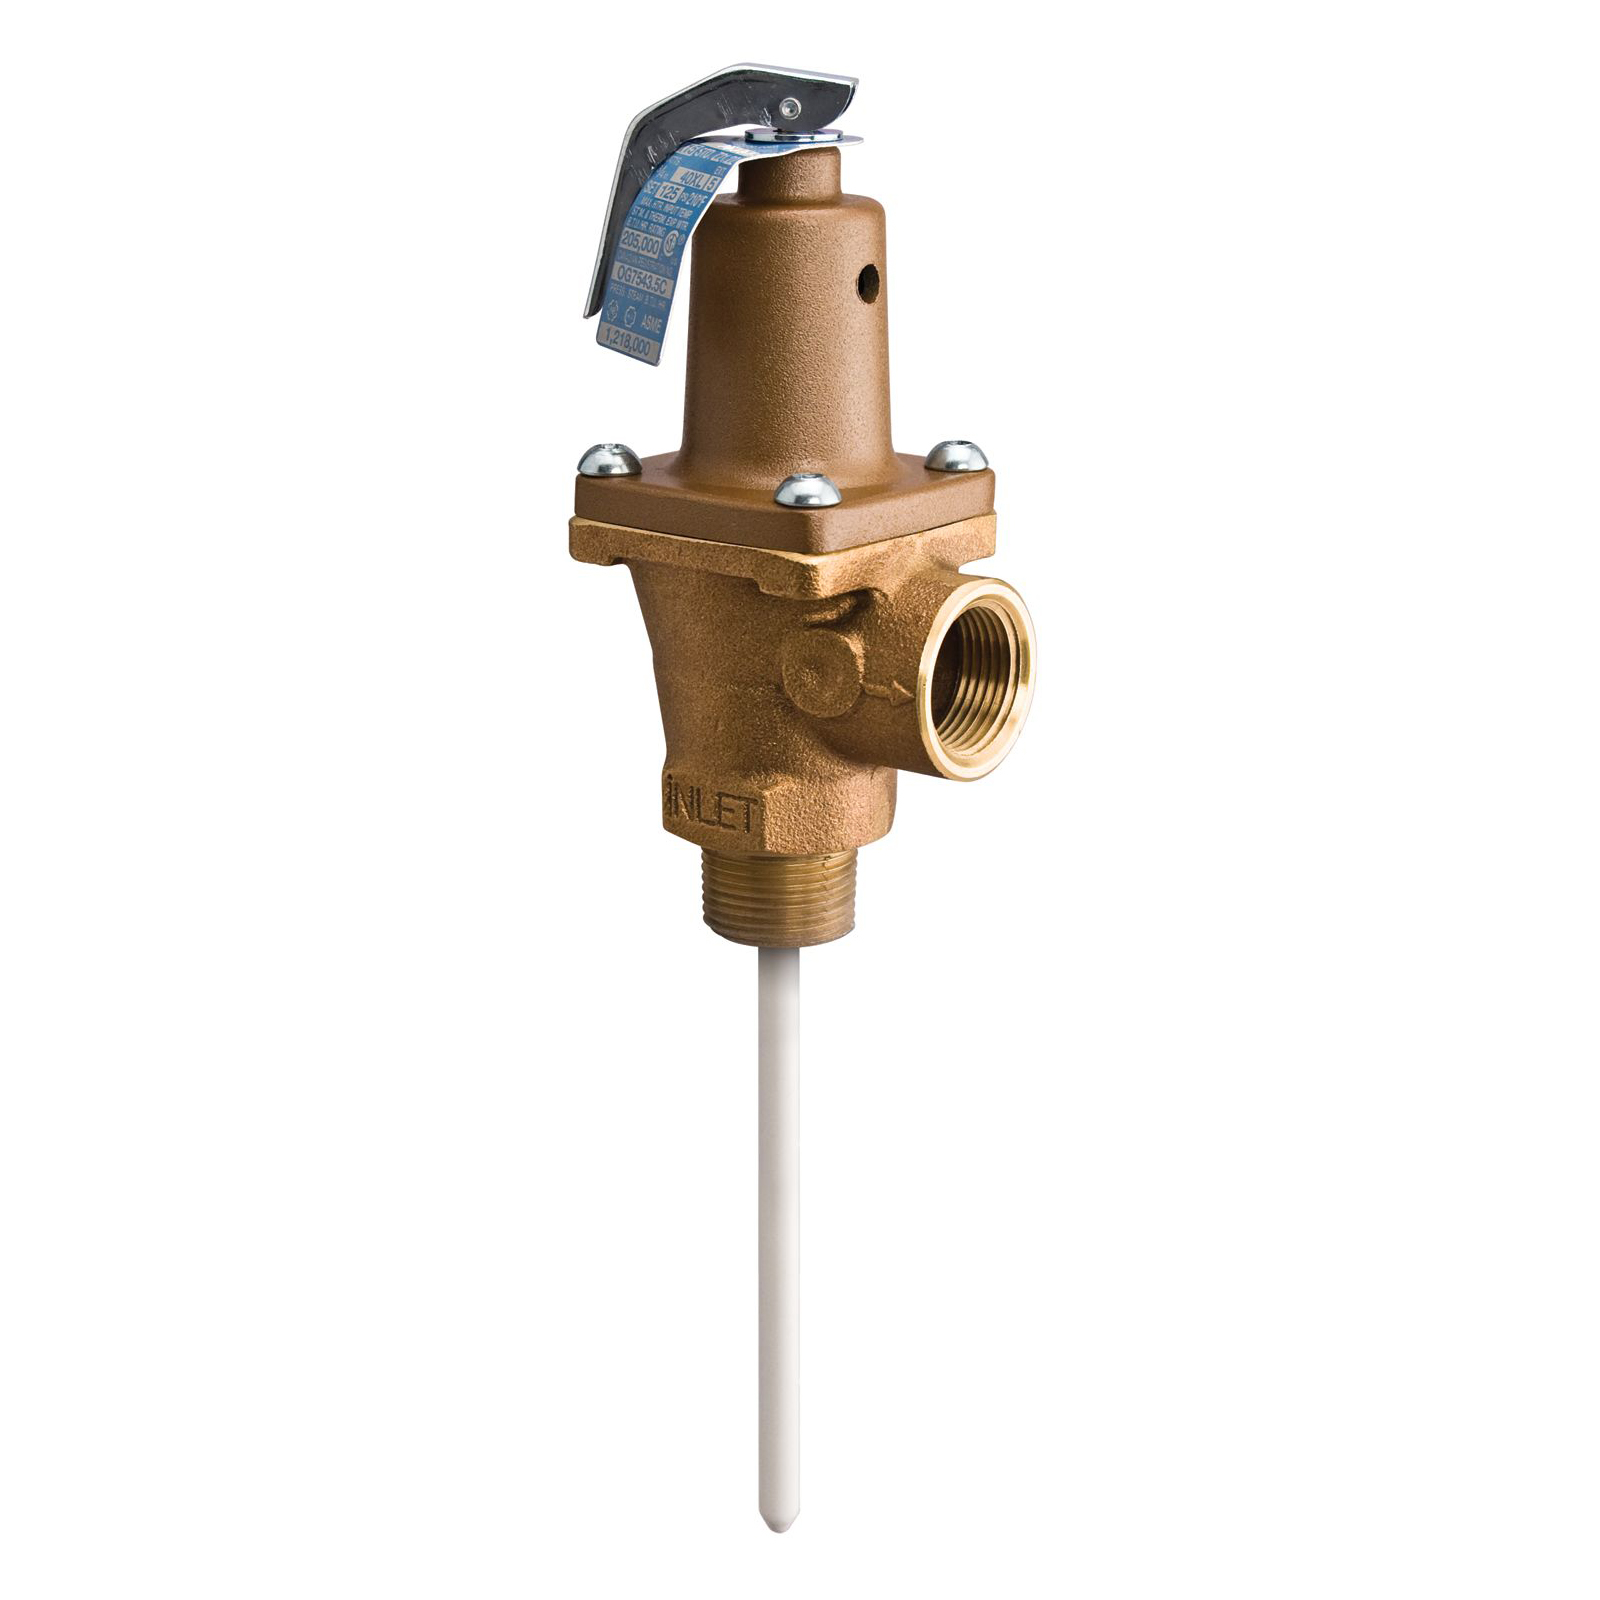 WATTS® 0158774 40 Series Automatic Reseating Temperature/Pressure Relief Valve, 3/4 in Nominal, MNPT x FNPT End Style, 150 psi Pressure, Bronze Body, Domestic